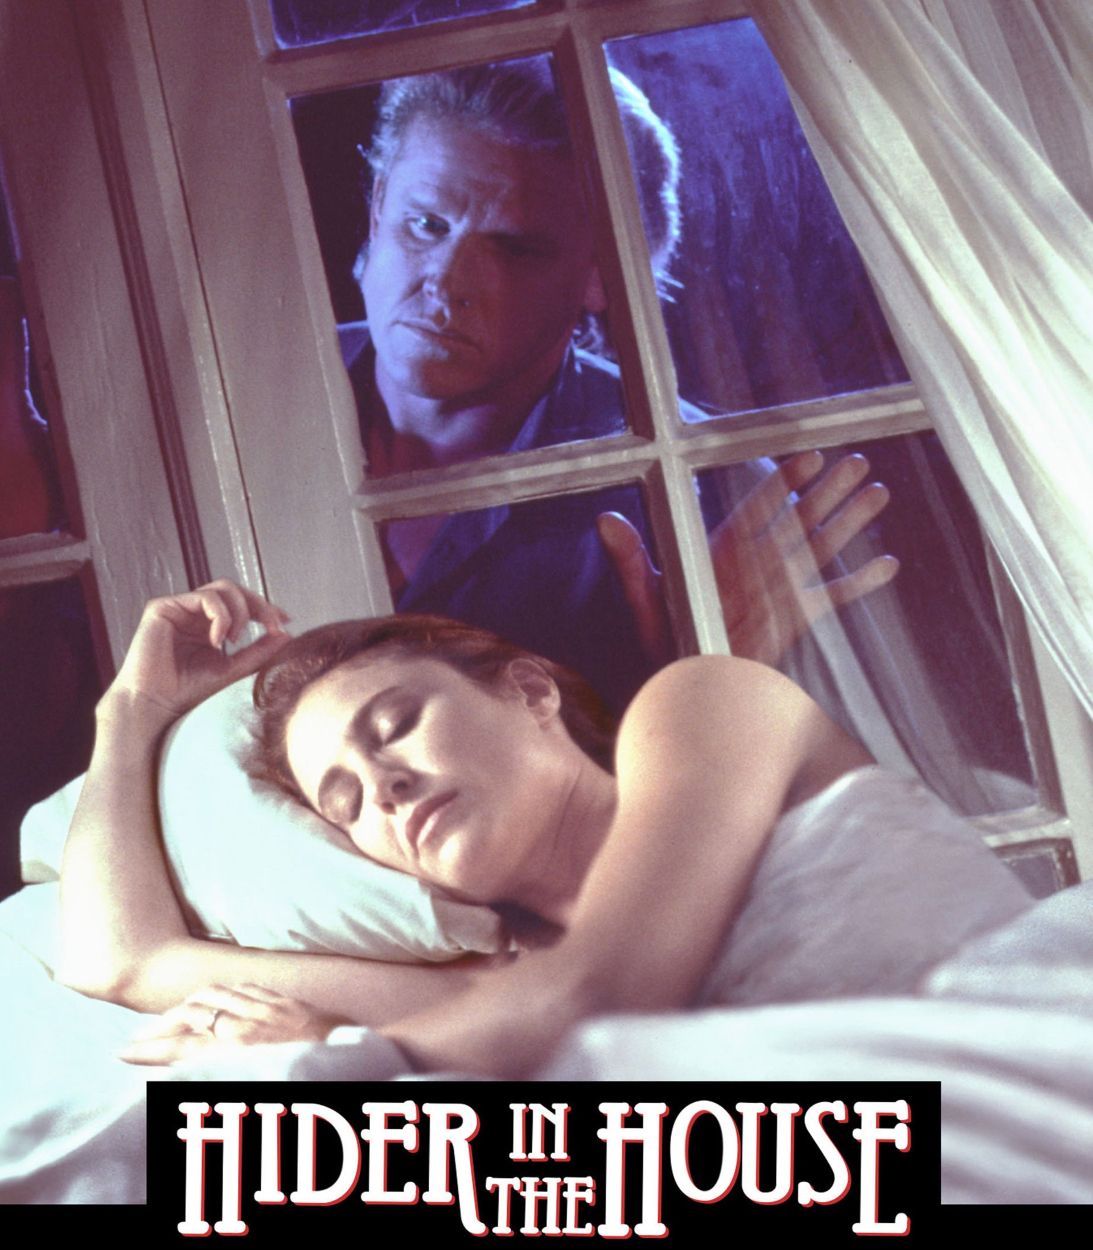 hider in the house poster TLDR vertical